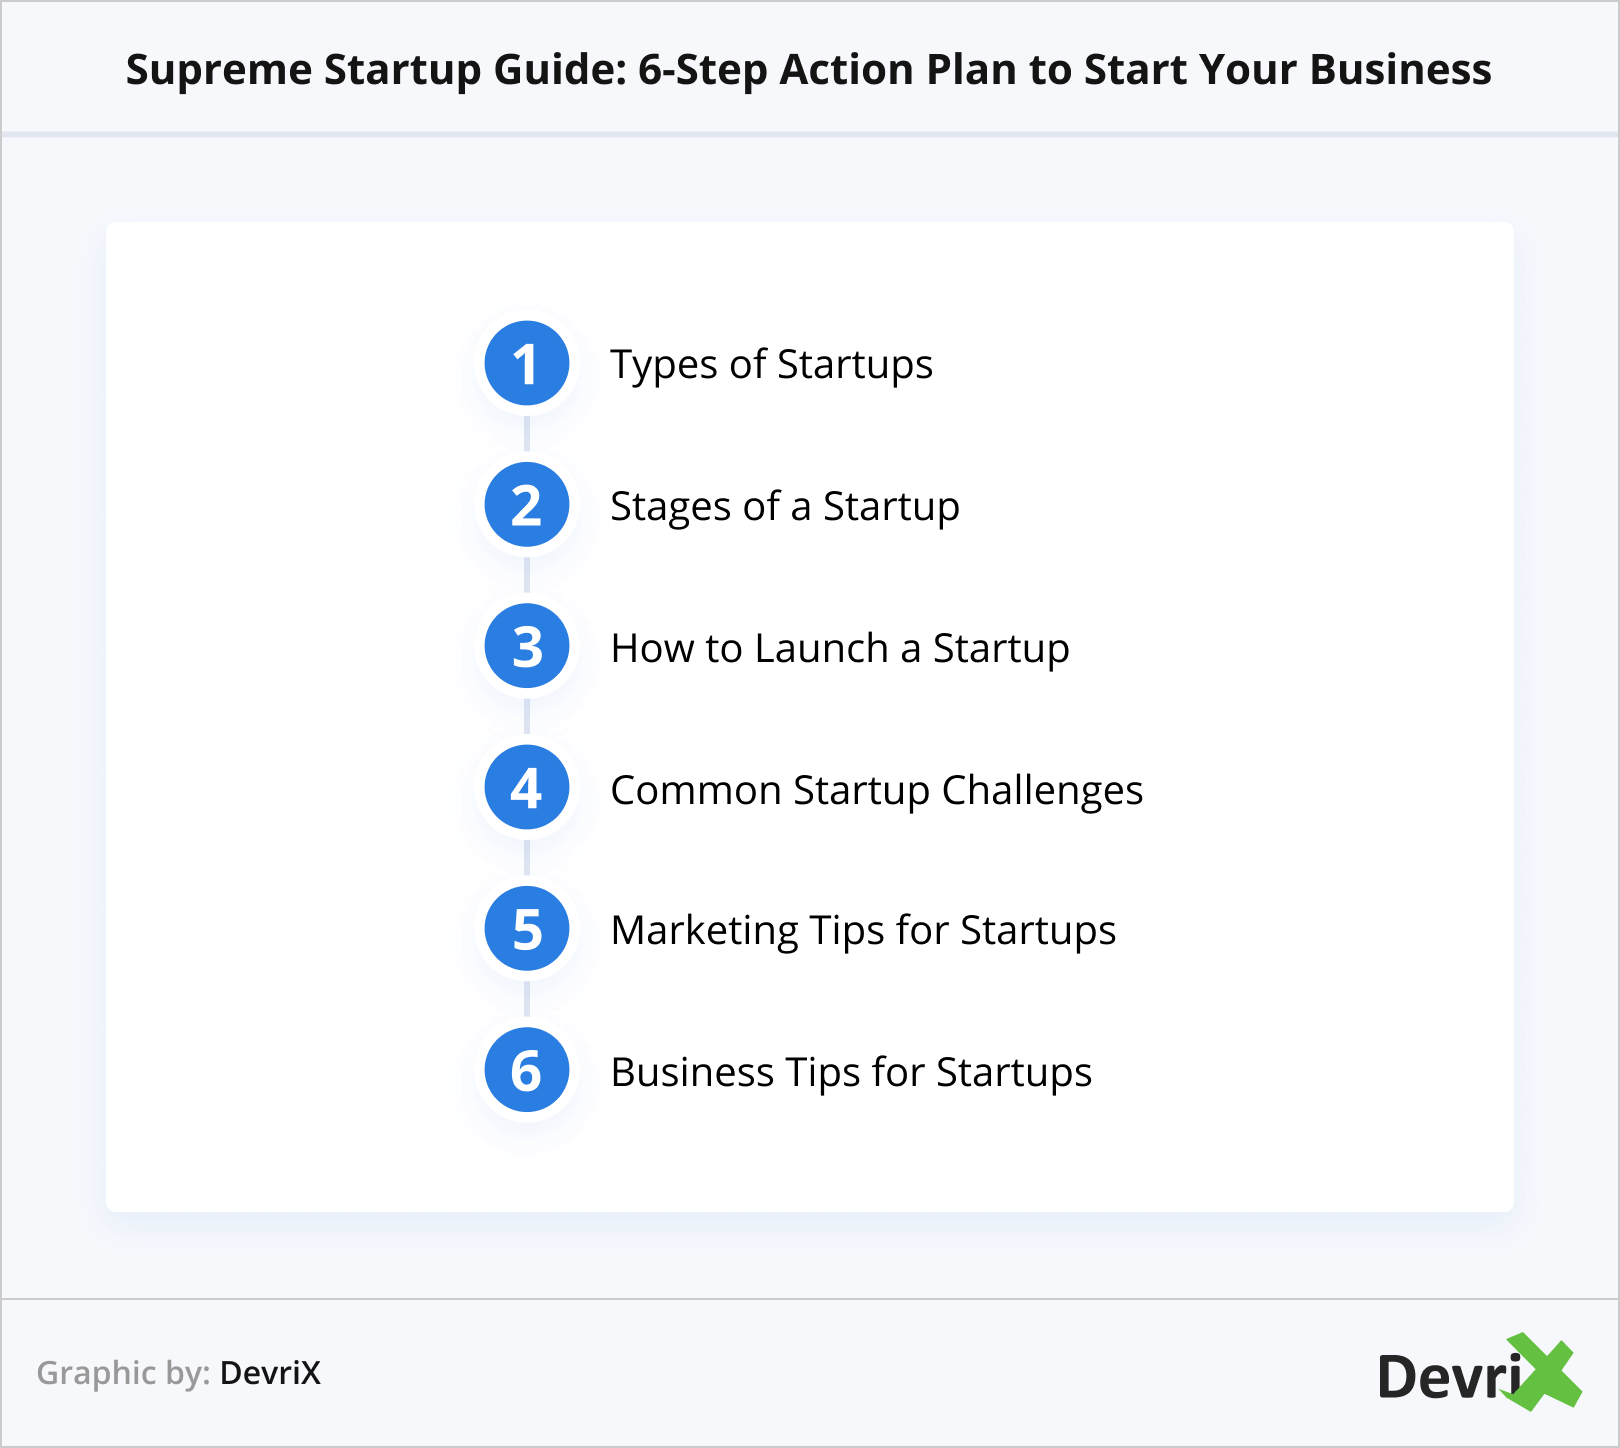 Supreme Startup Guide: 6-Step Action Plan to Start Your Business